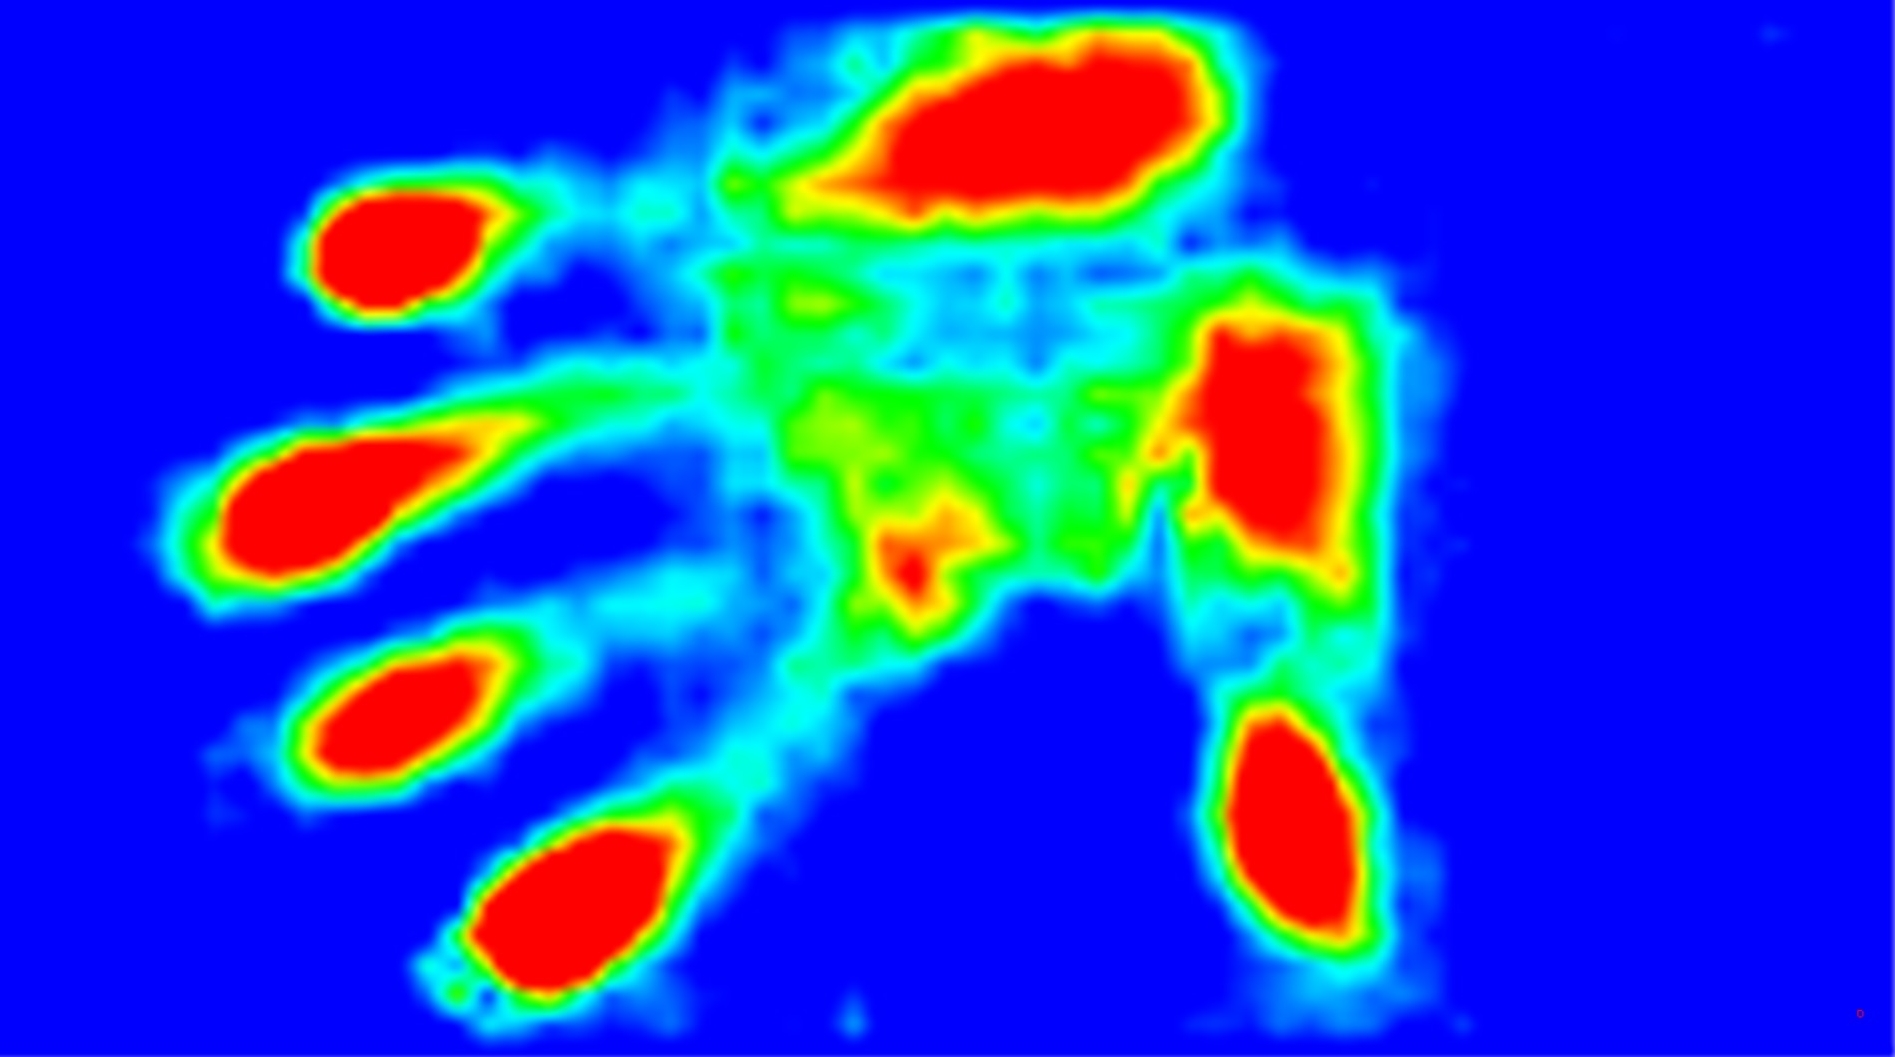 Touch heat map obtained while wearing thick winter gloves